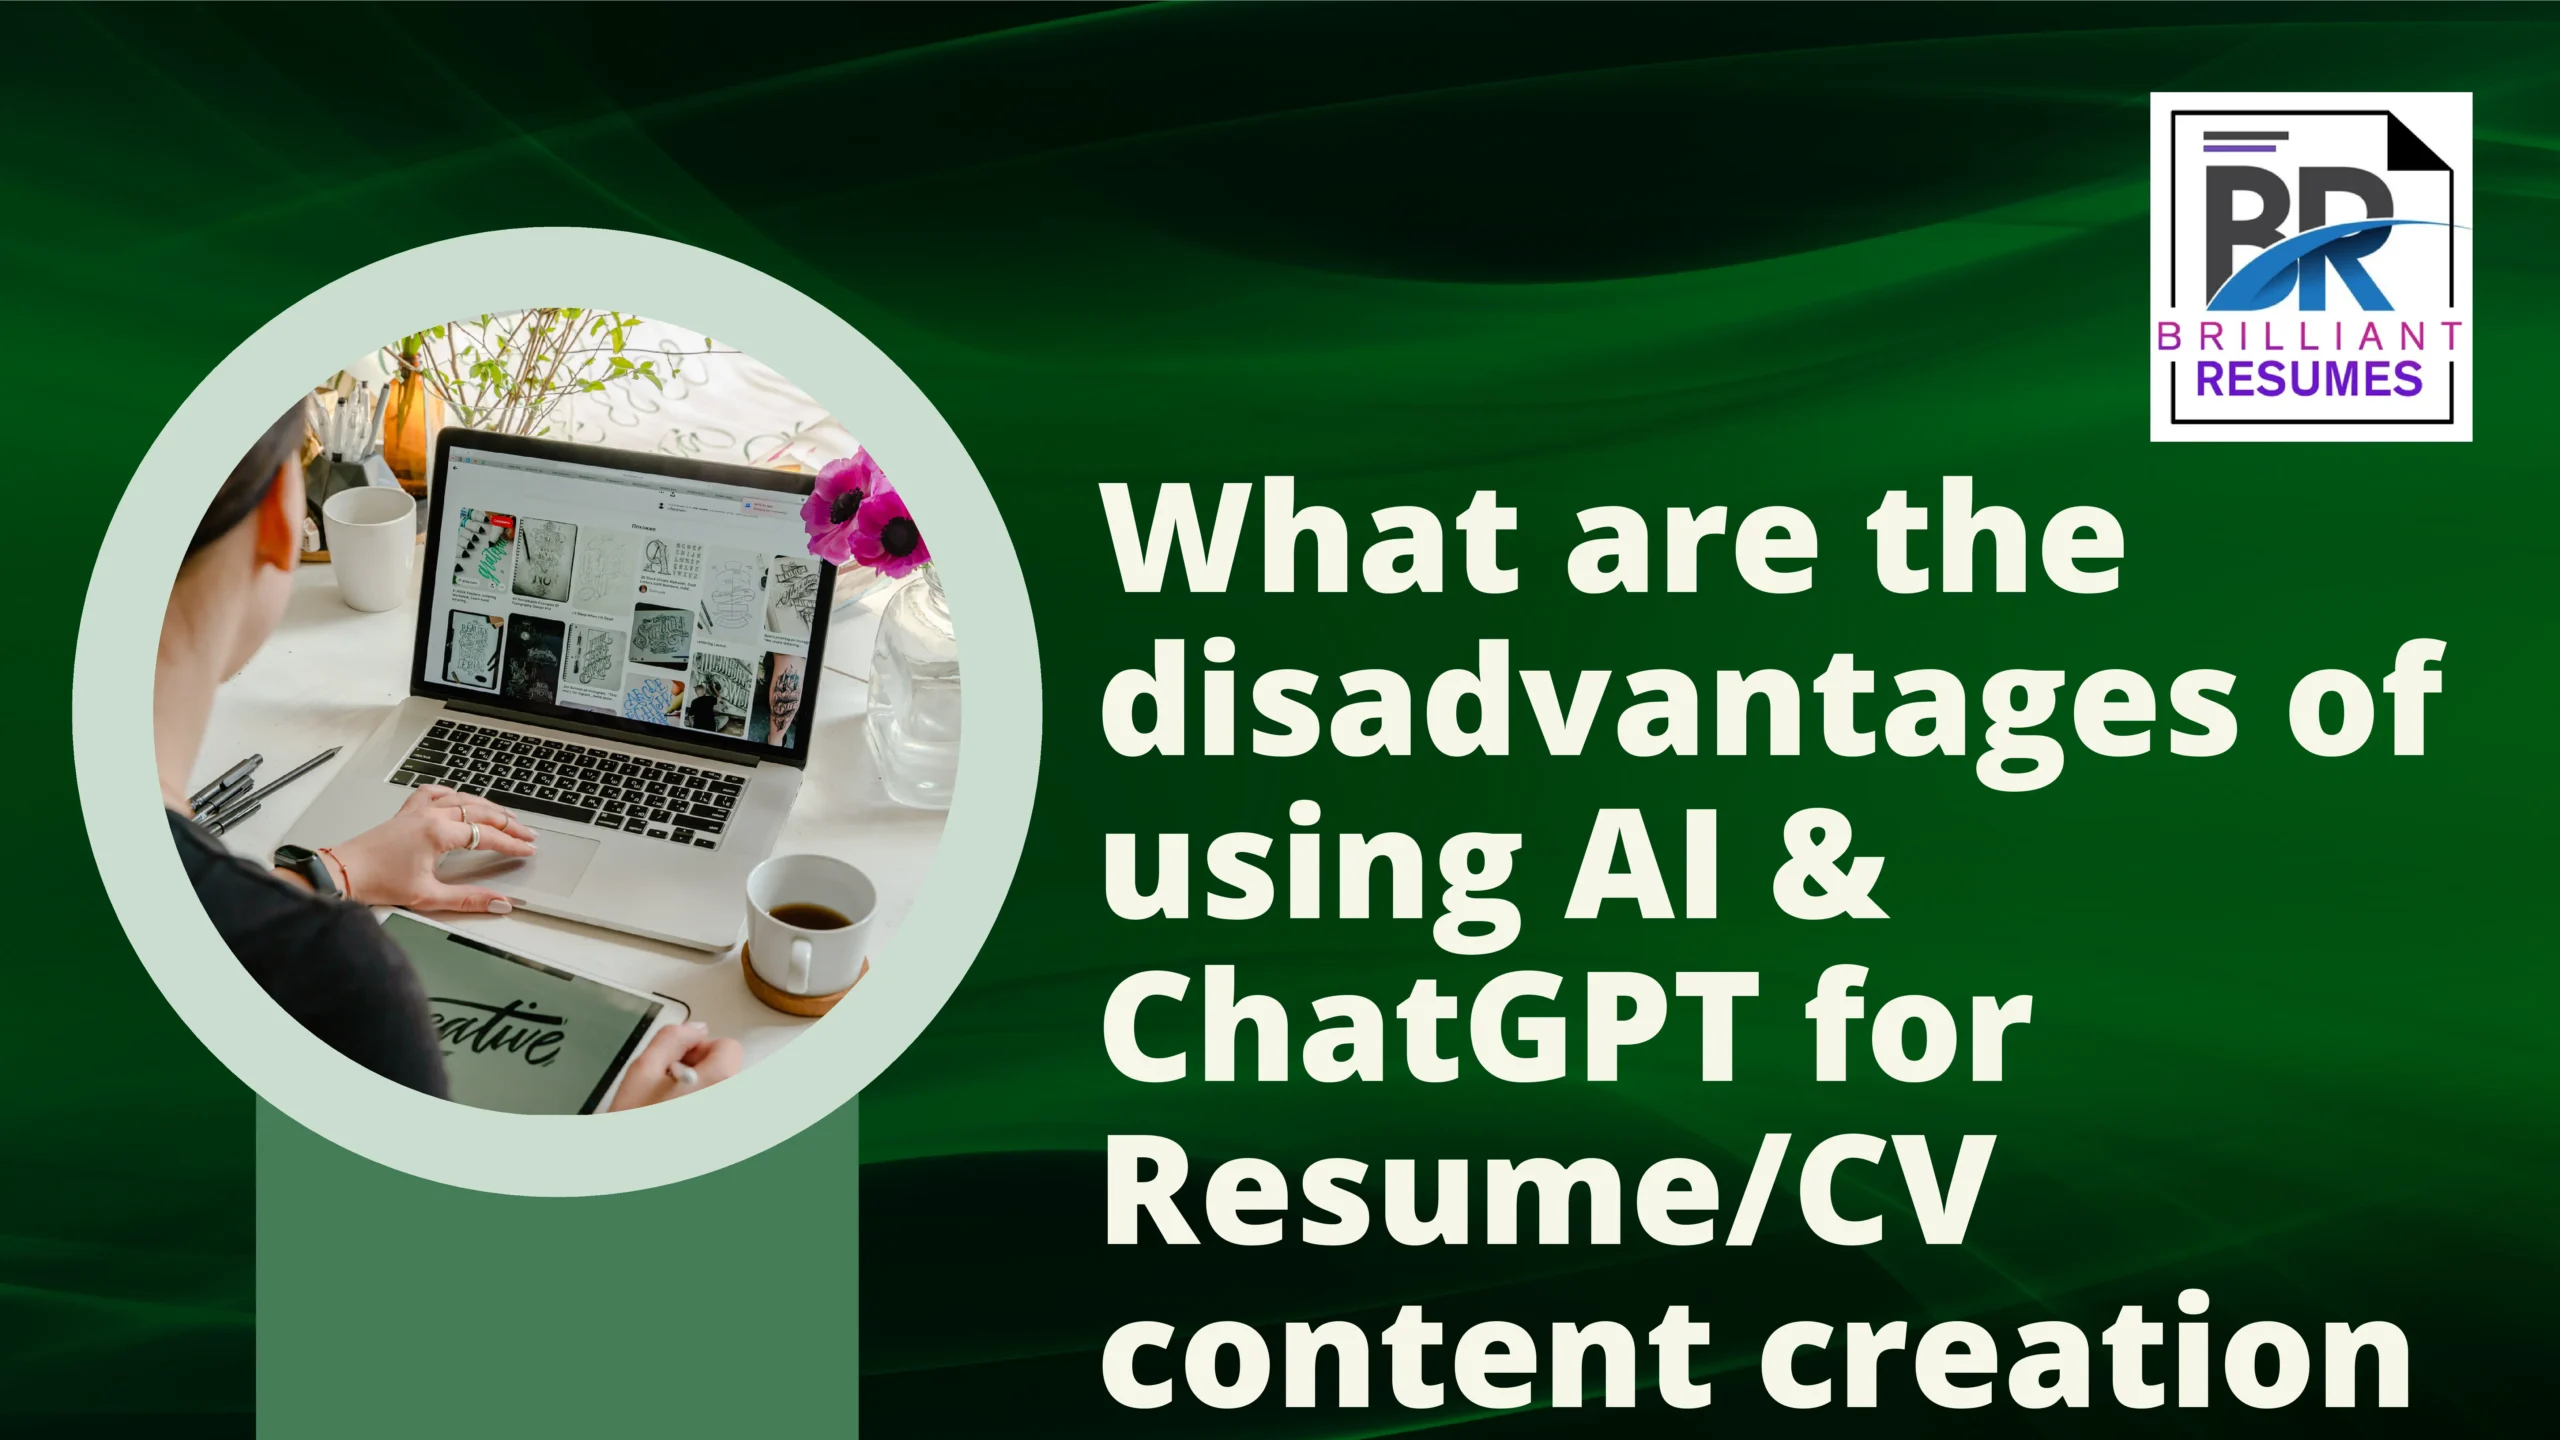 What are the disadvantages of using AI and ChatGPT for Resume/CV content creation?